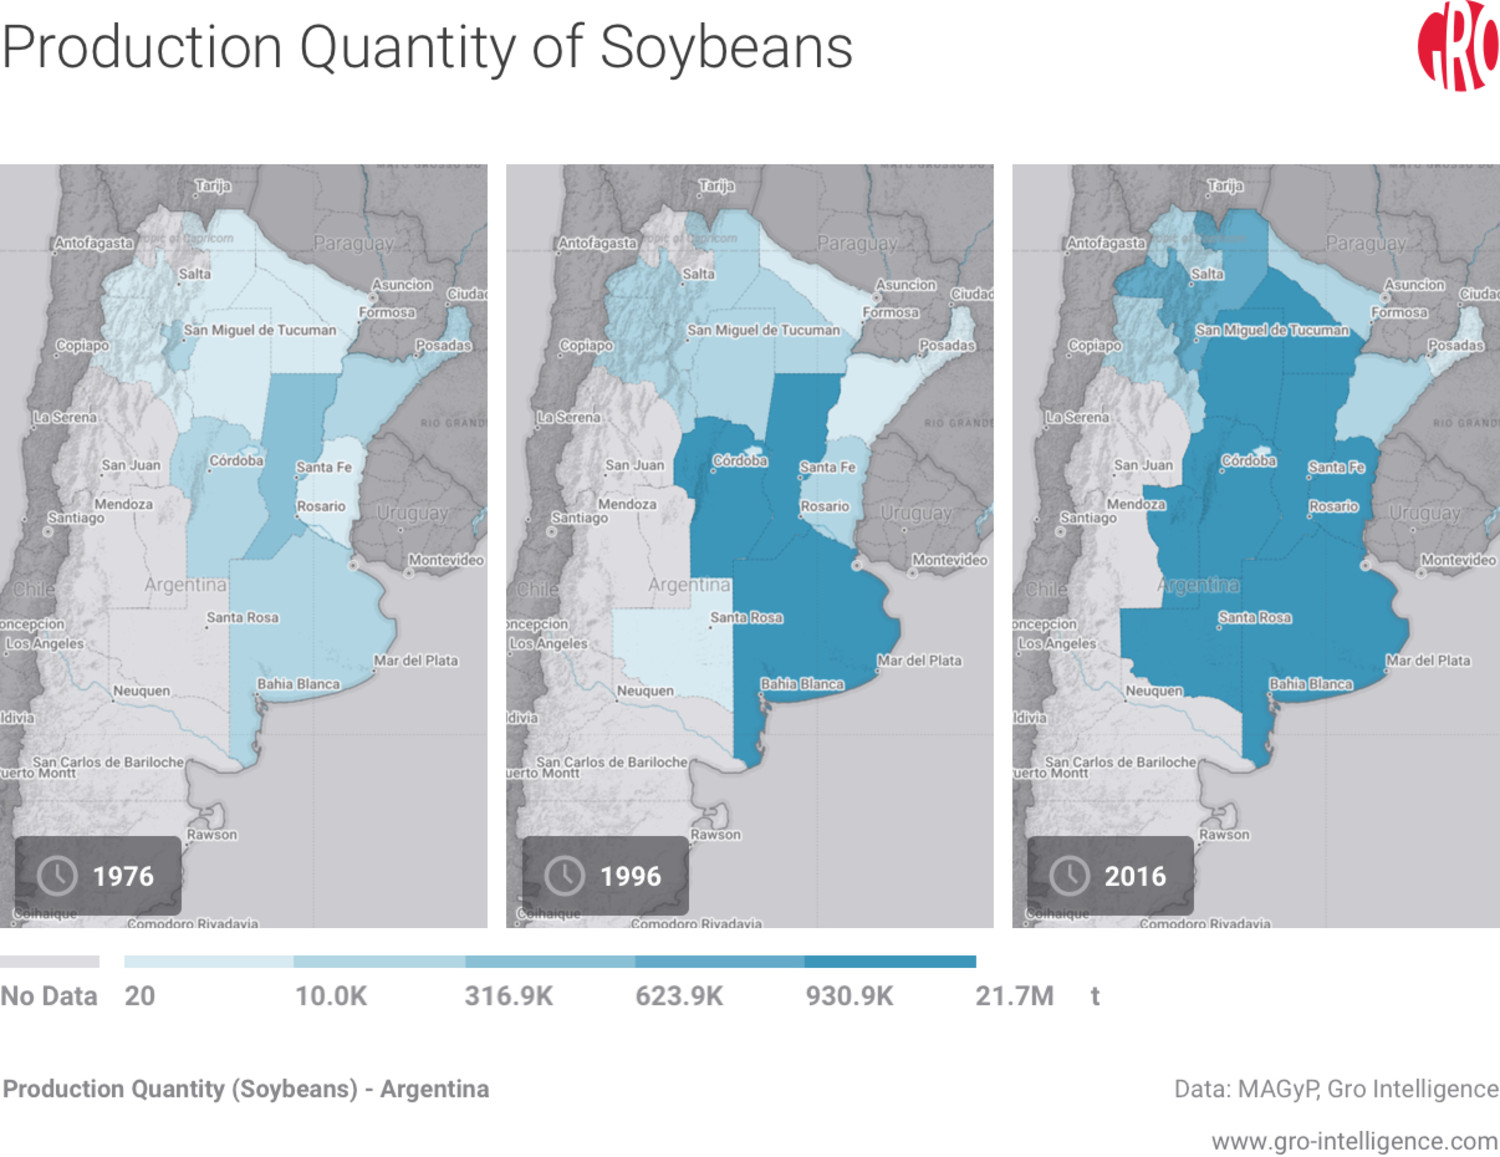 Production Quantity of Soybeans